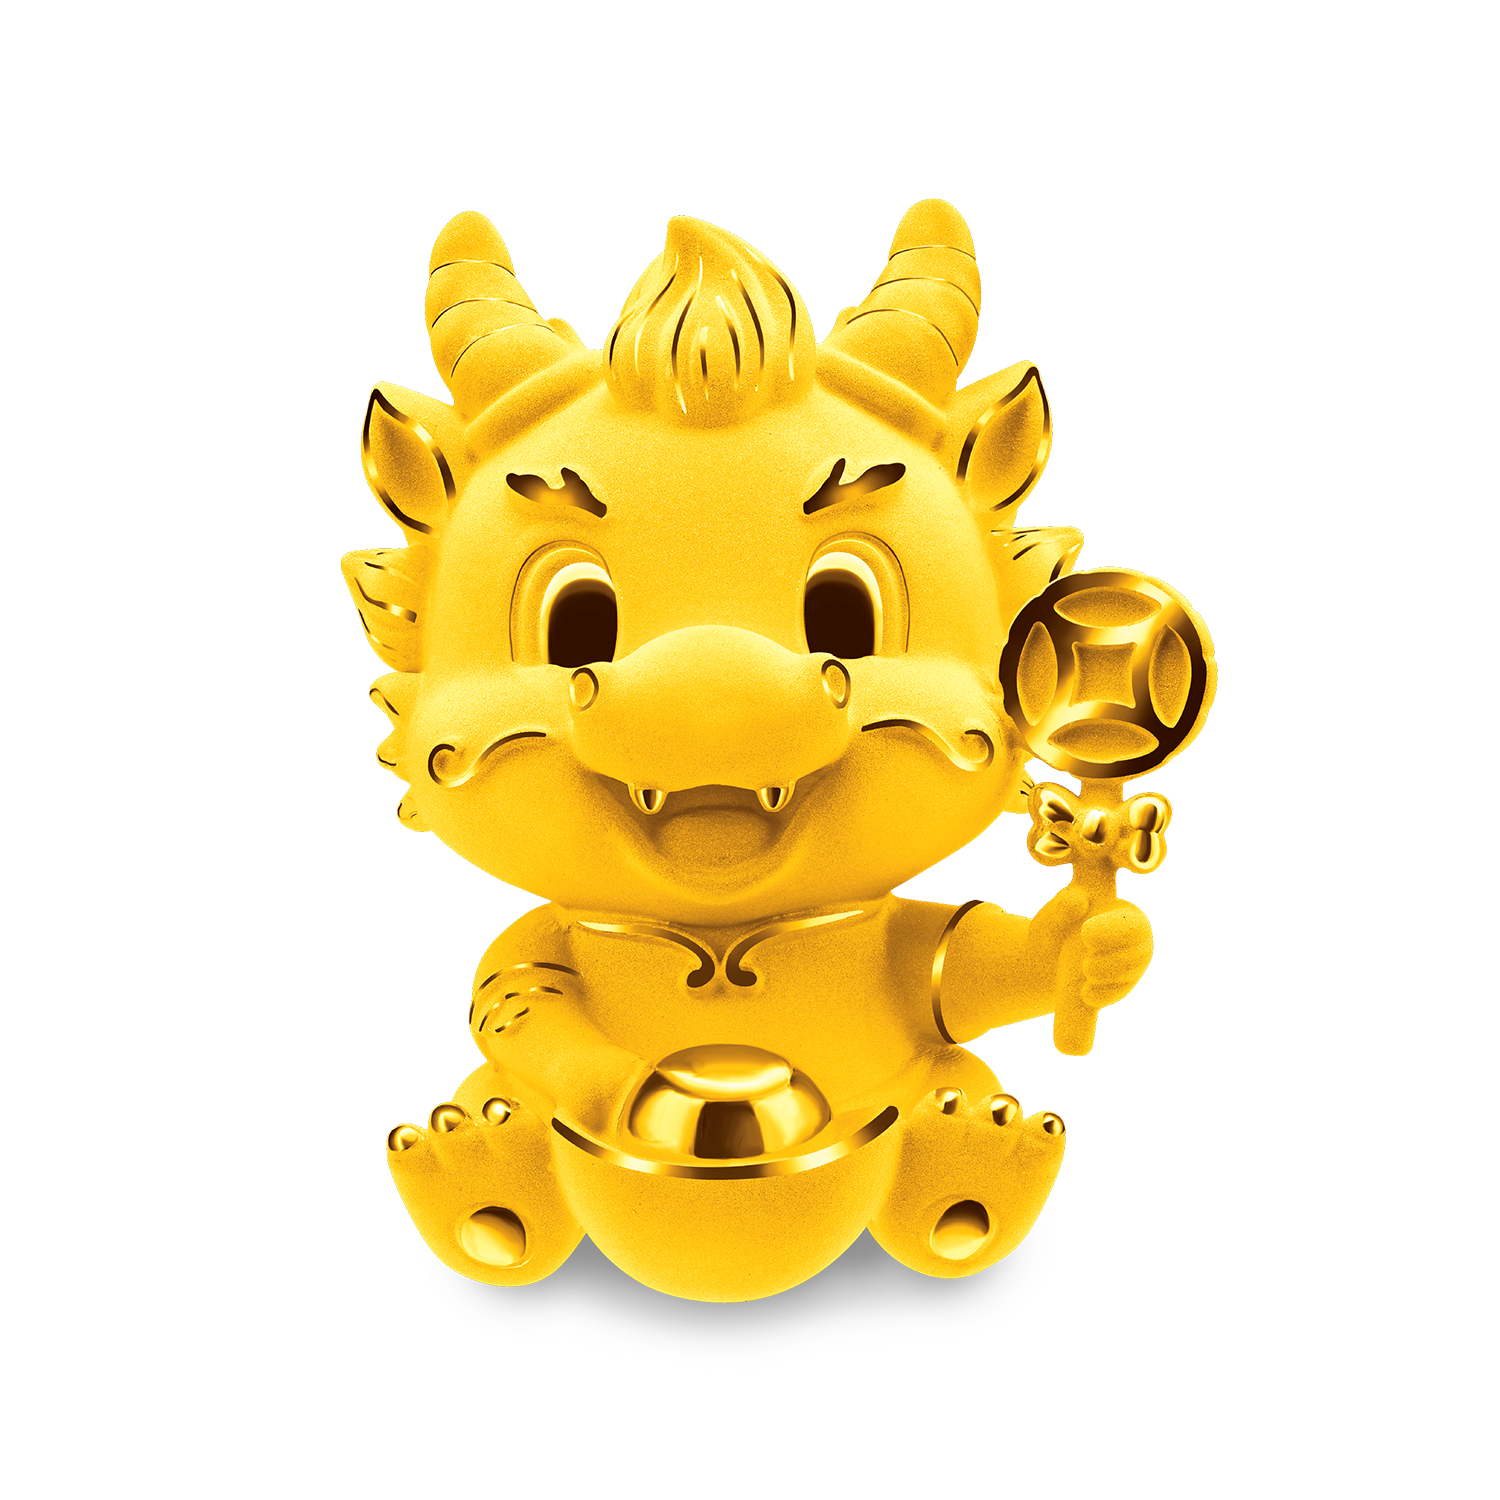 Fortune Dragon Collection "Happy Baby Dragon" Gold Figurine in Crystal Ball Music Box